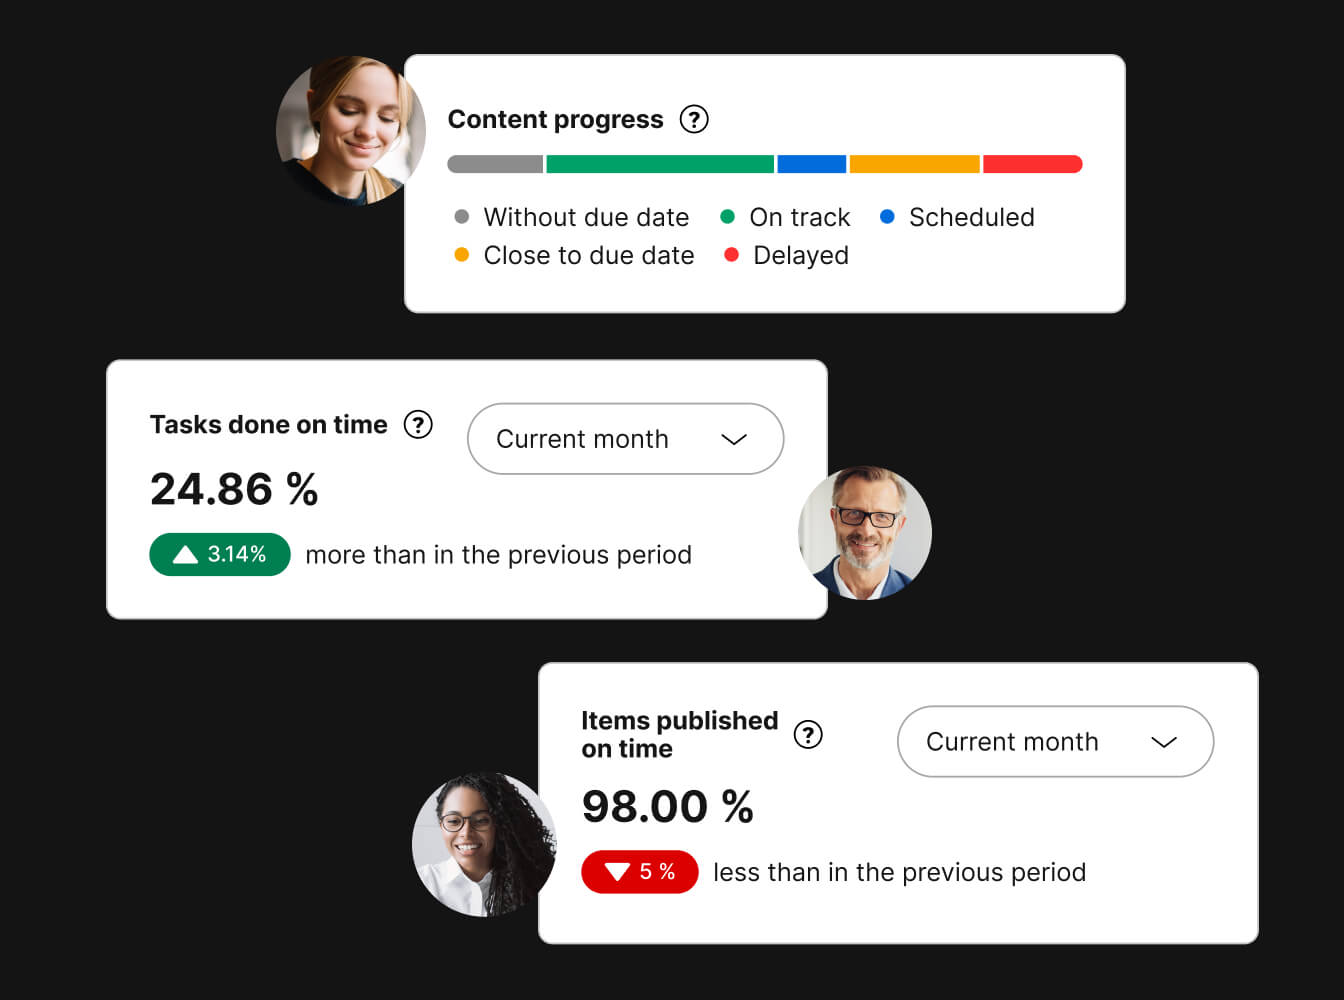 Access all key insights at a glance. Check in on content progress, tasks done on time, items published on time and more in convenient, easy-to-digest view. Compare and benchmark your current and past results to iterate on your approach.
